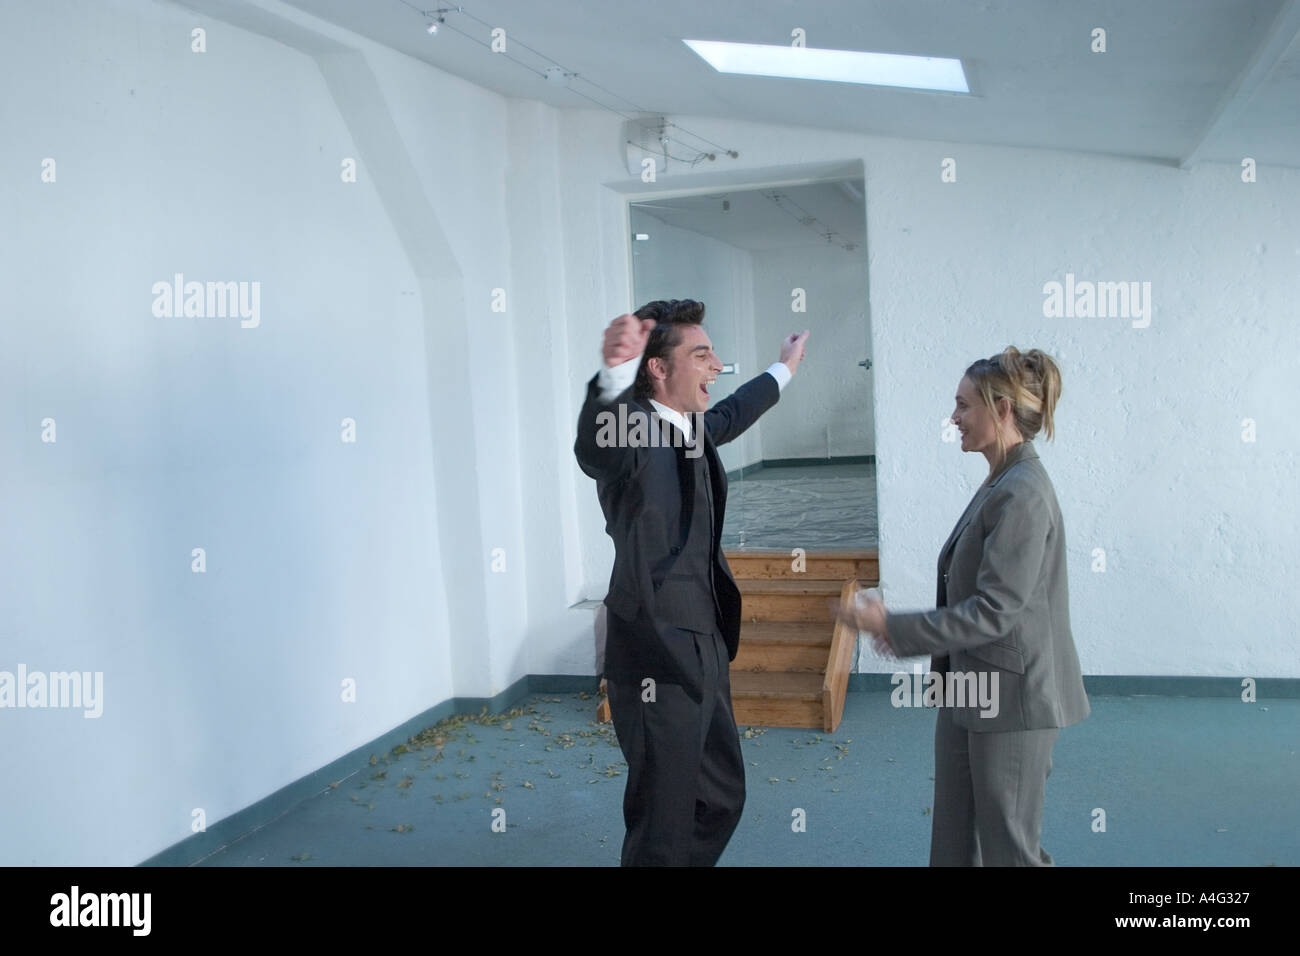 MR Man and woman in business dress cheer in an empty loft Stock Photo